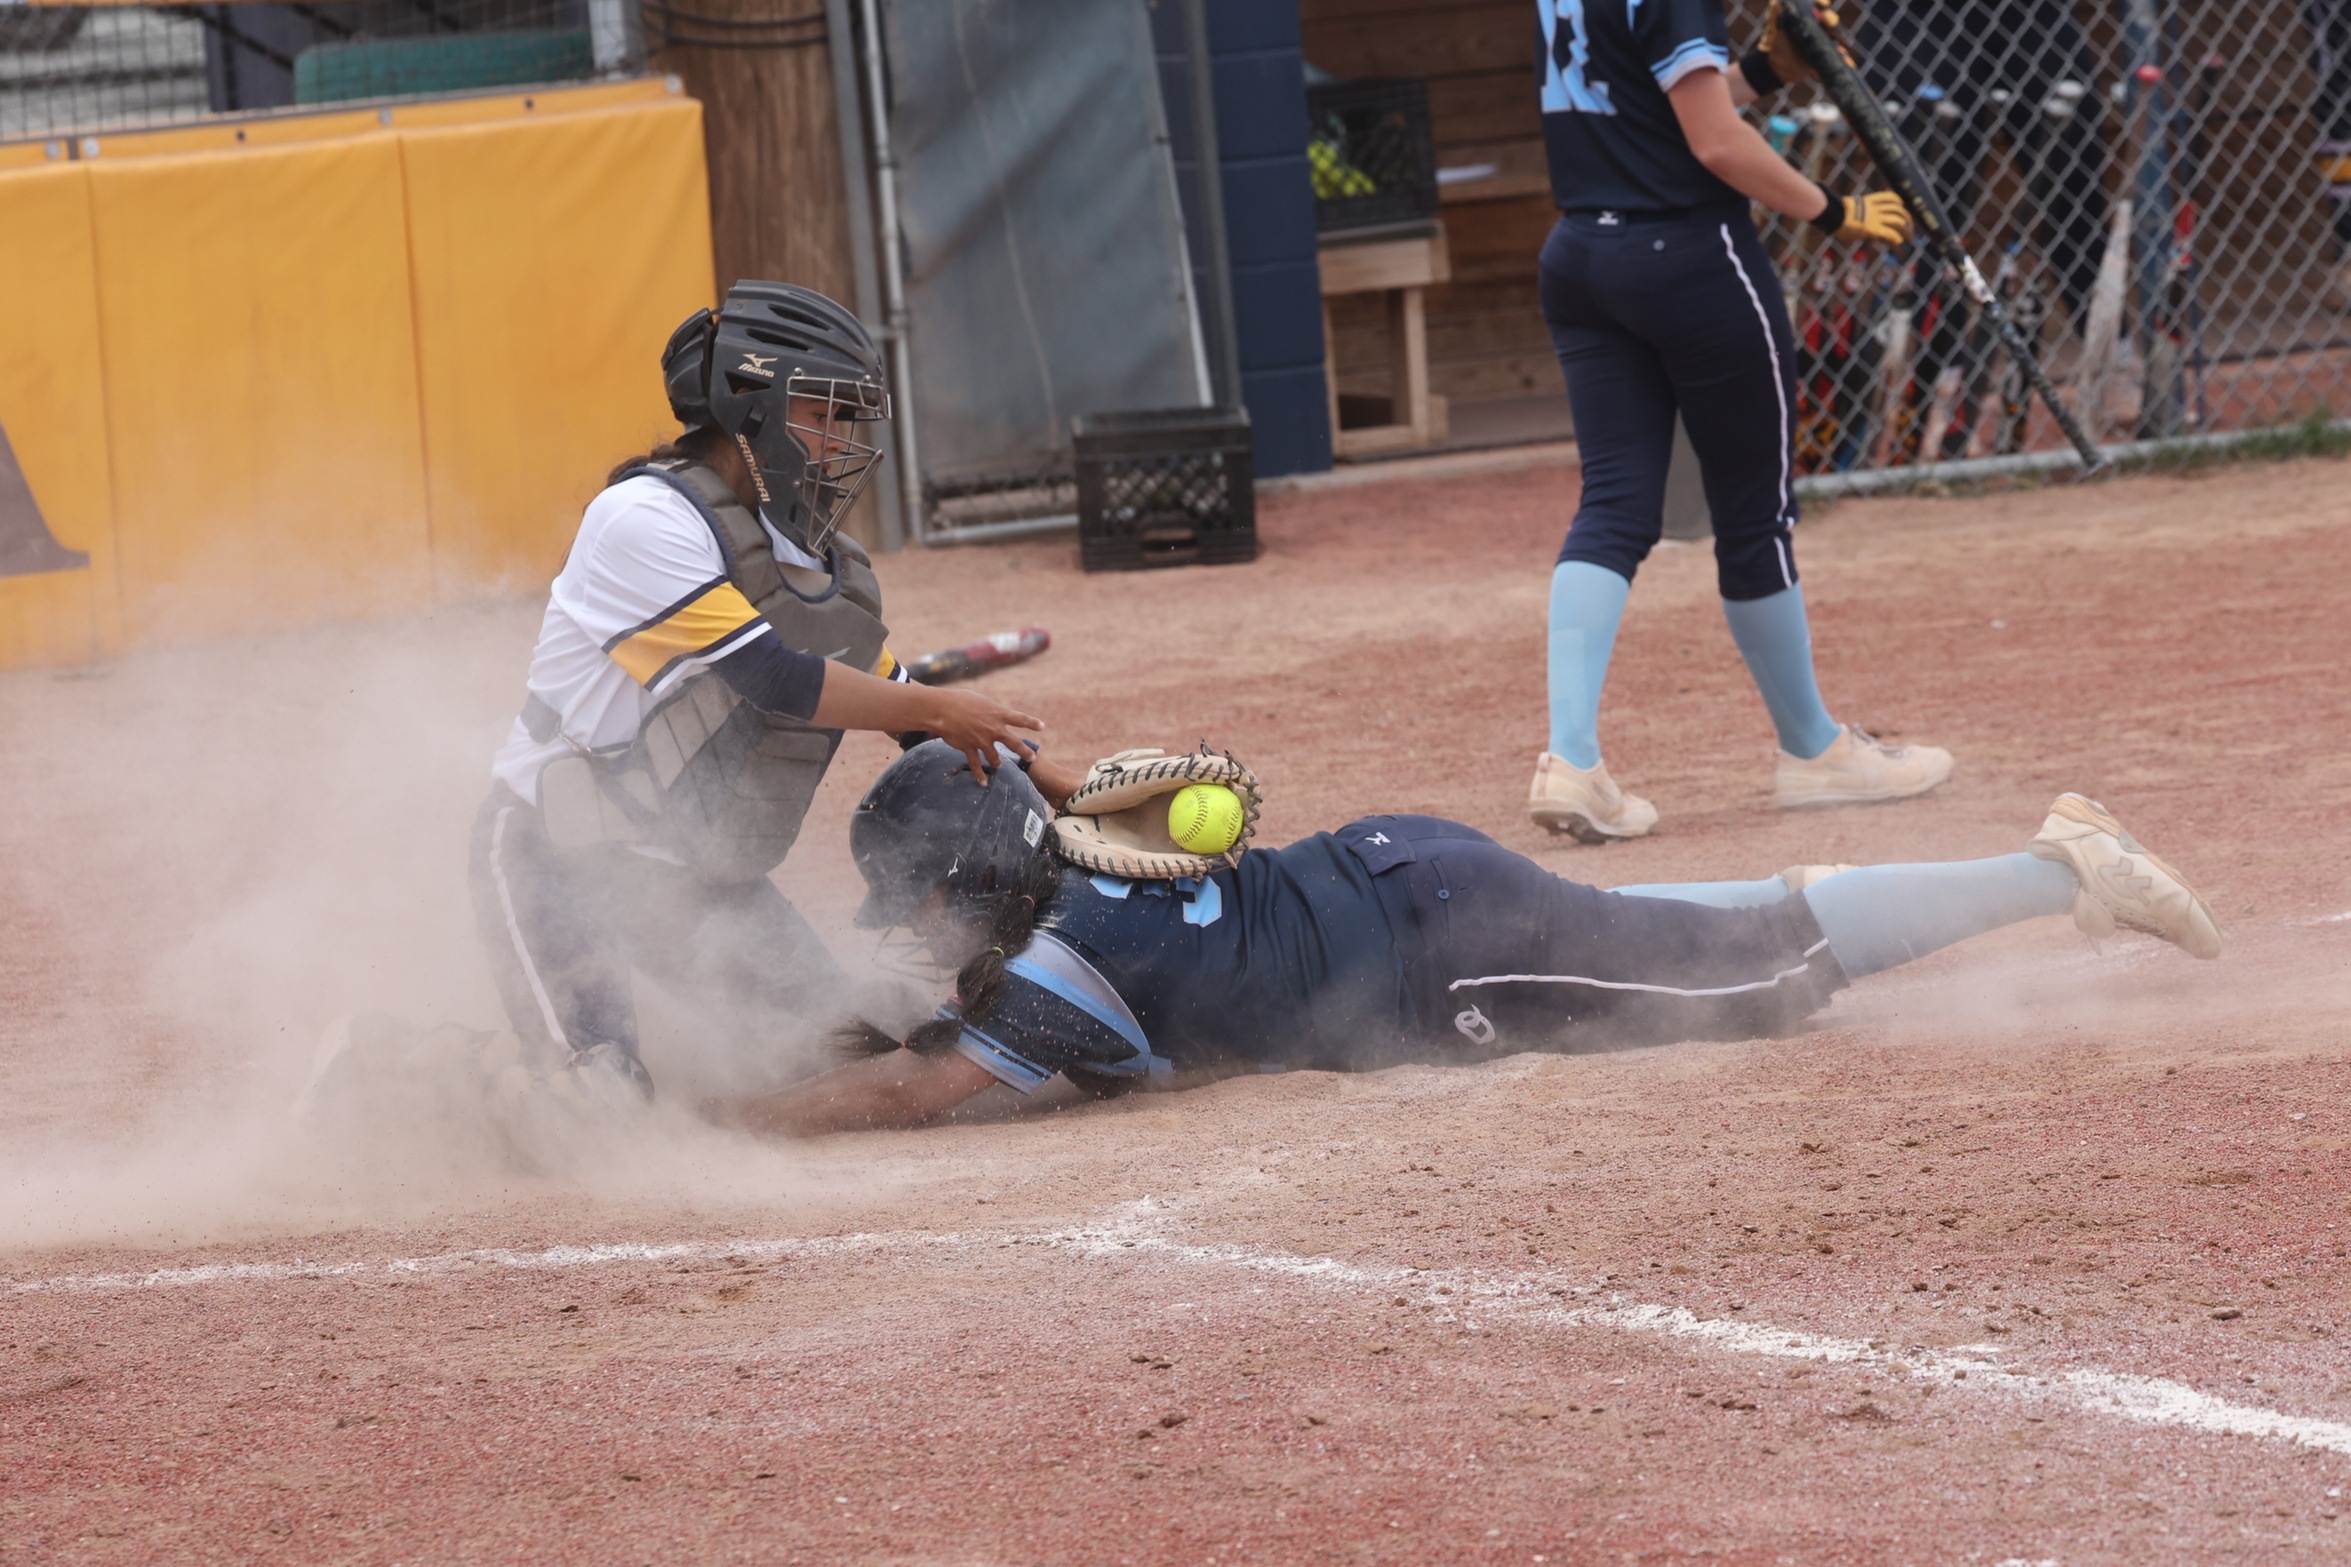 DemiRae Woolsey goes for a tag at home plate.